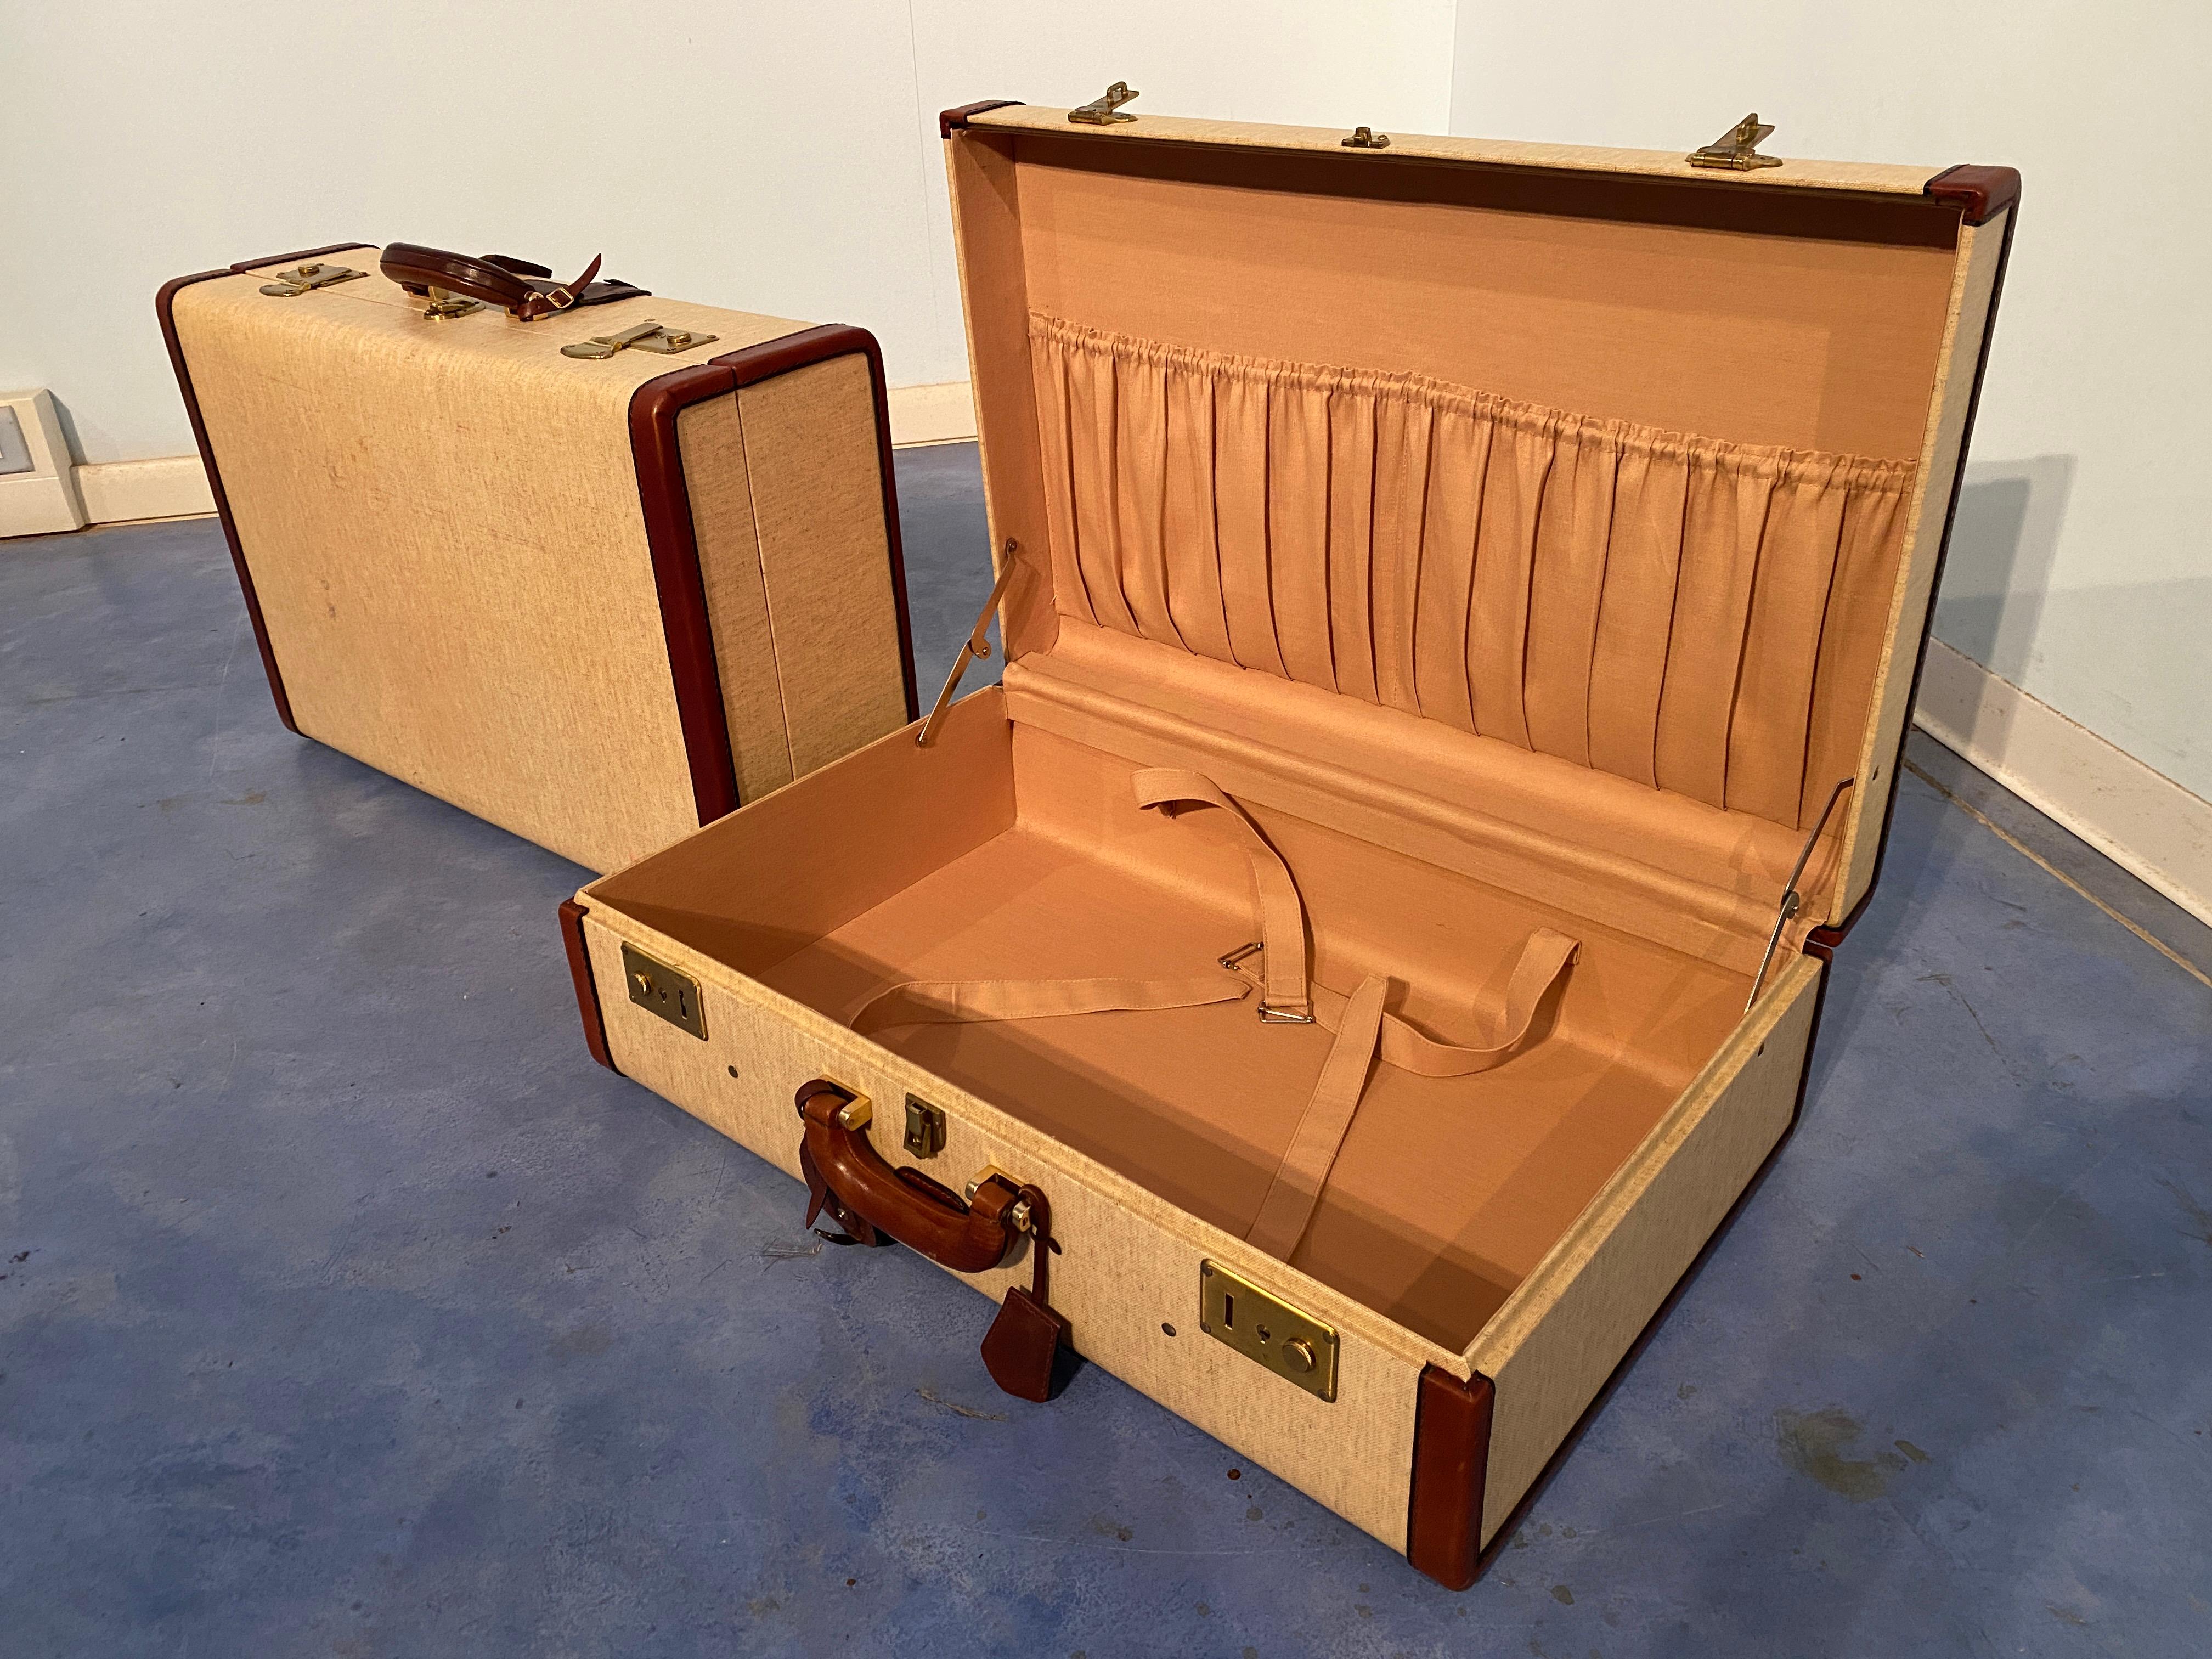 Italian Mid-Century Moder Luggages or Suitcases Mèlange Color, Set of Two, 1960 For Sale 4